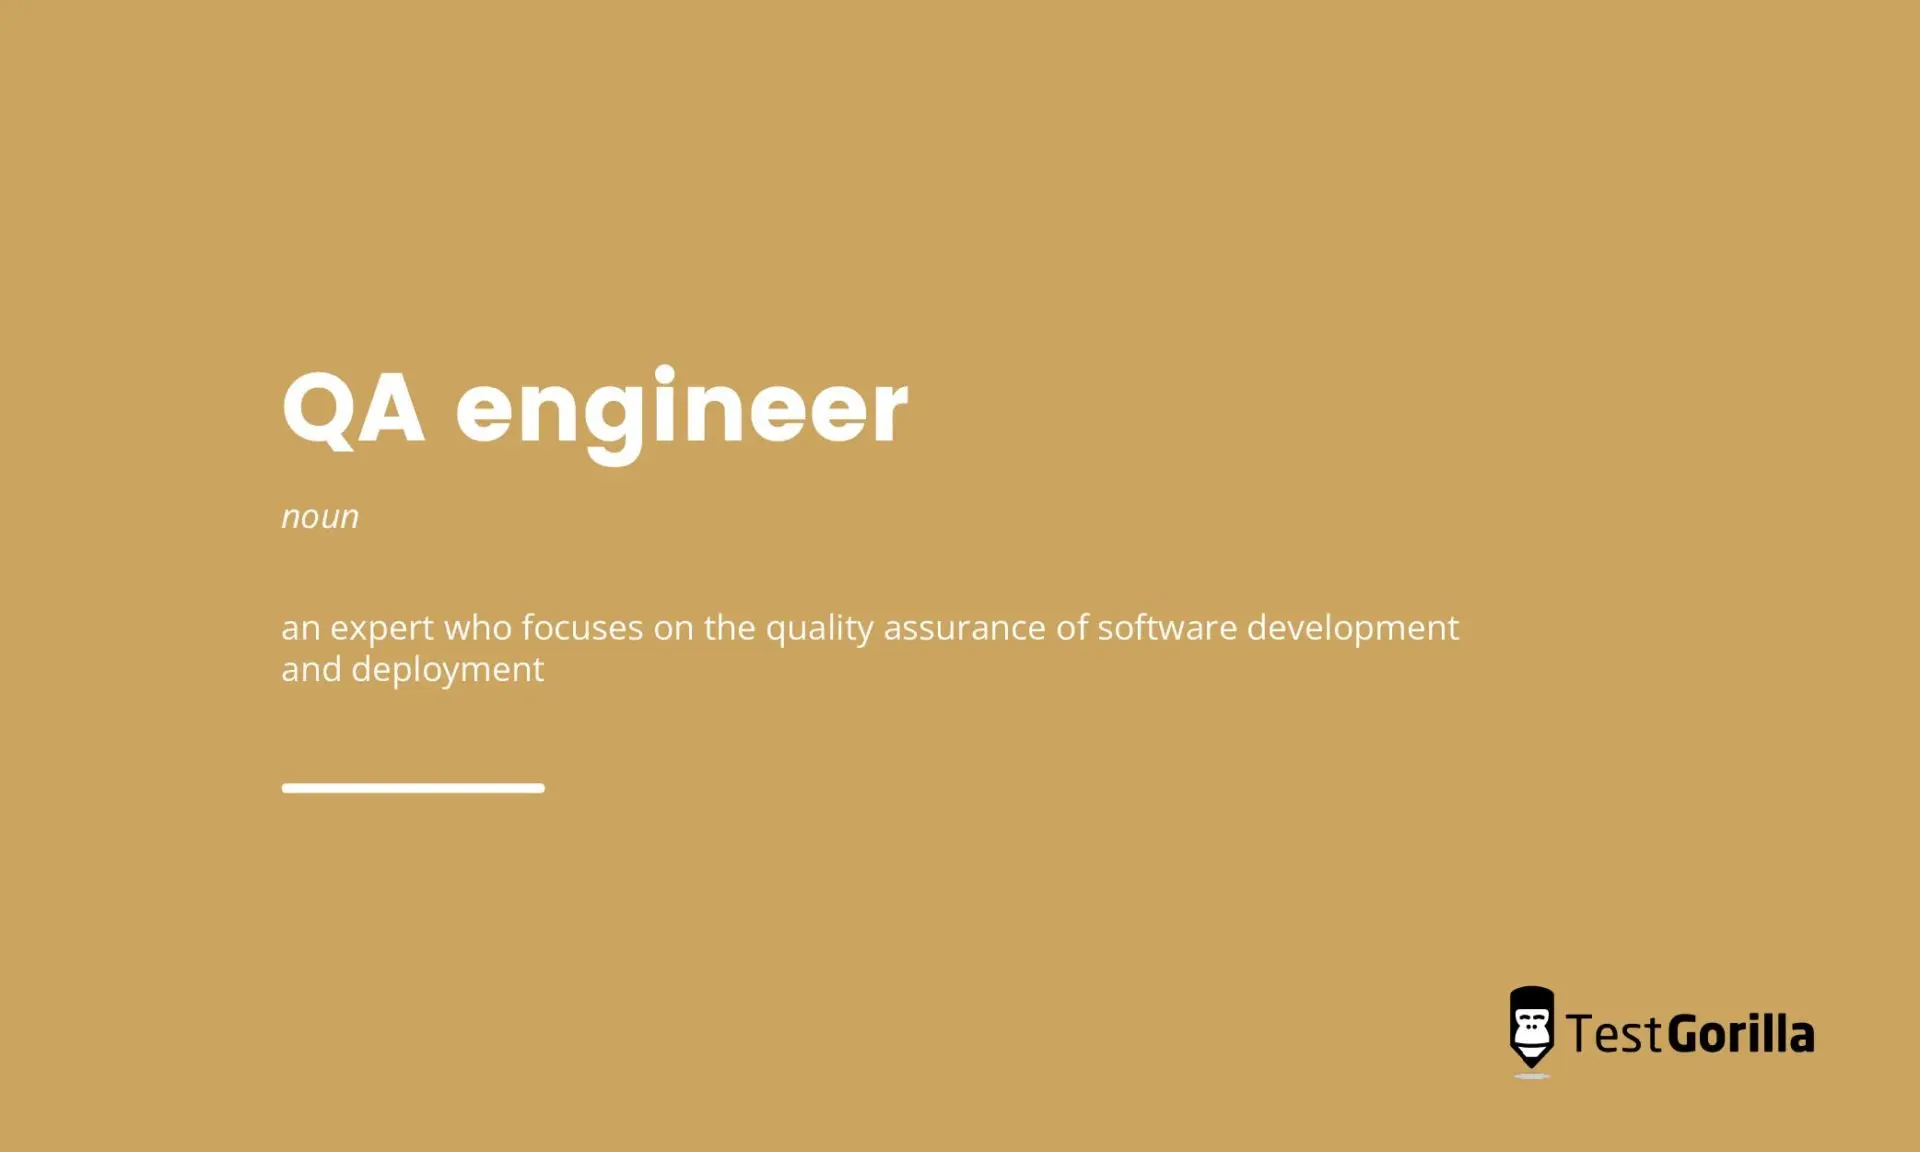 image showing definition of QA engineer